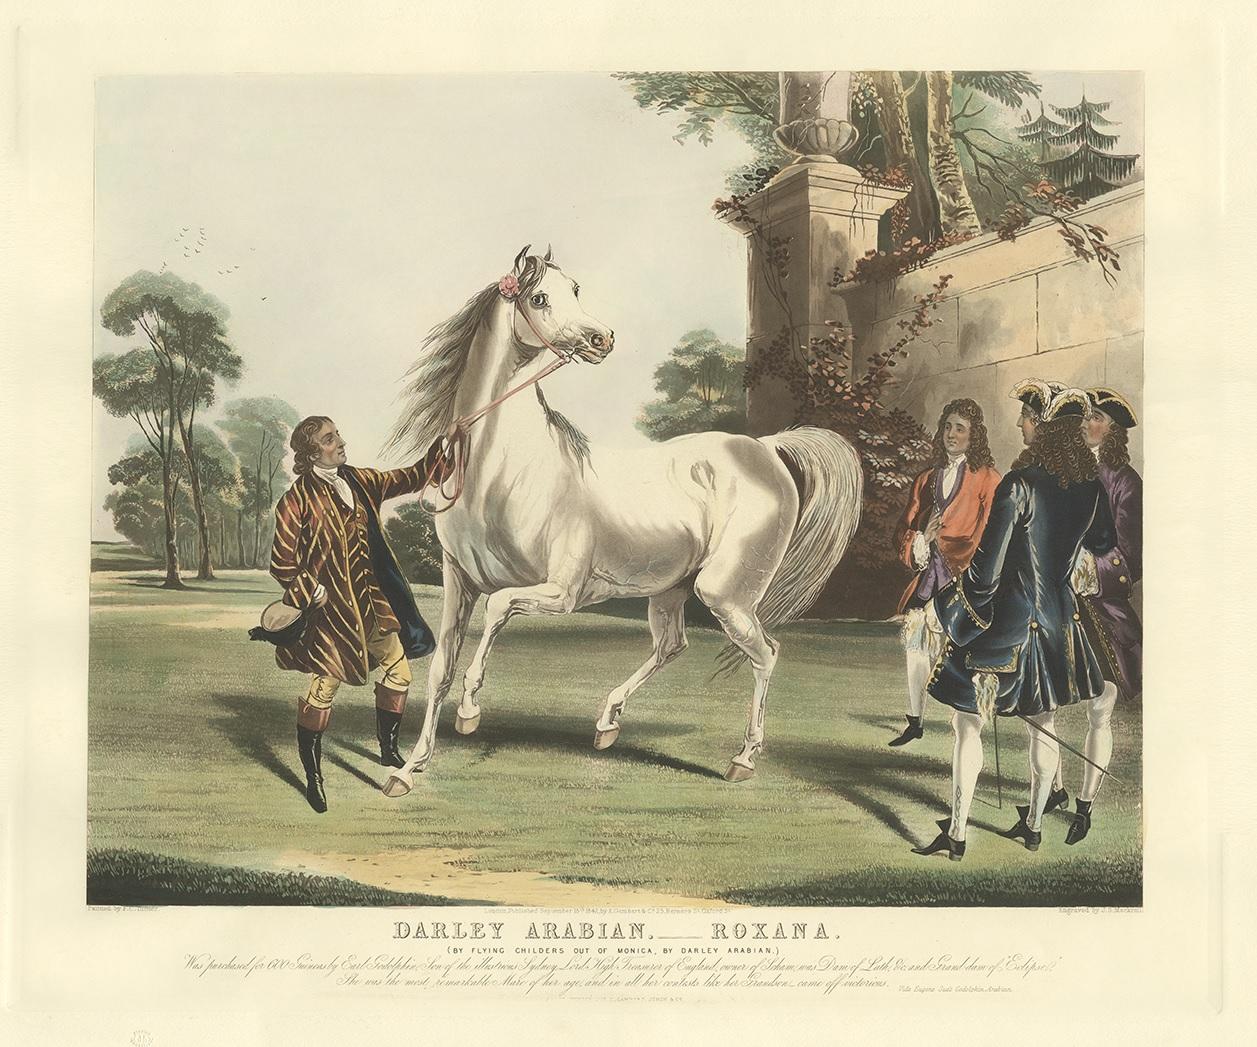 Antique print titled 'Darley Arabian - Roxana'. The Darley Arabian (foaled circa 1700) was one of three dominant foundation sires of modern Thoroughbred horse racing bloodstock, whose arrival in England during the reign of Queen Anne was the event